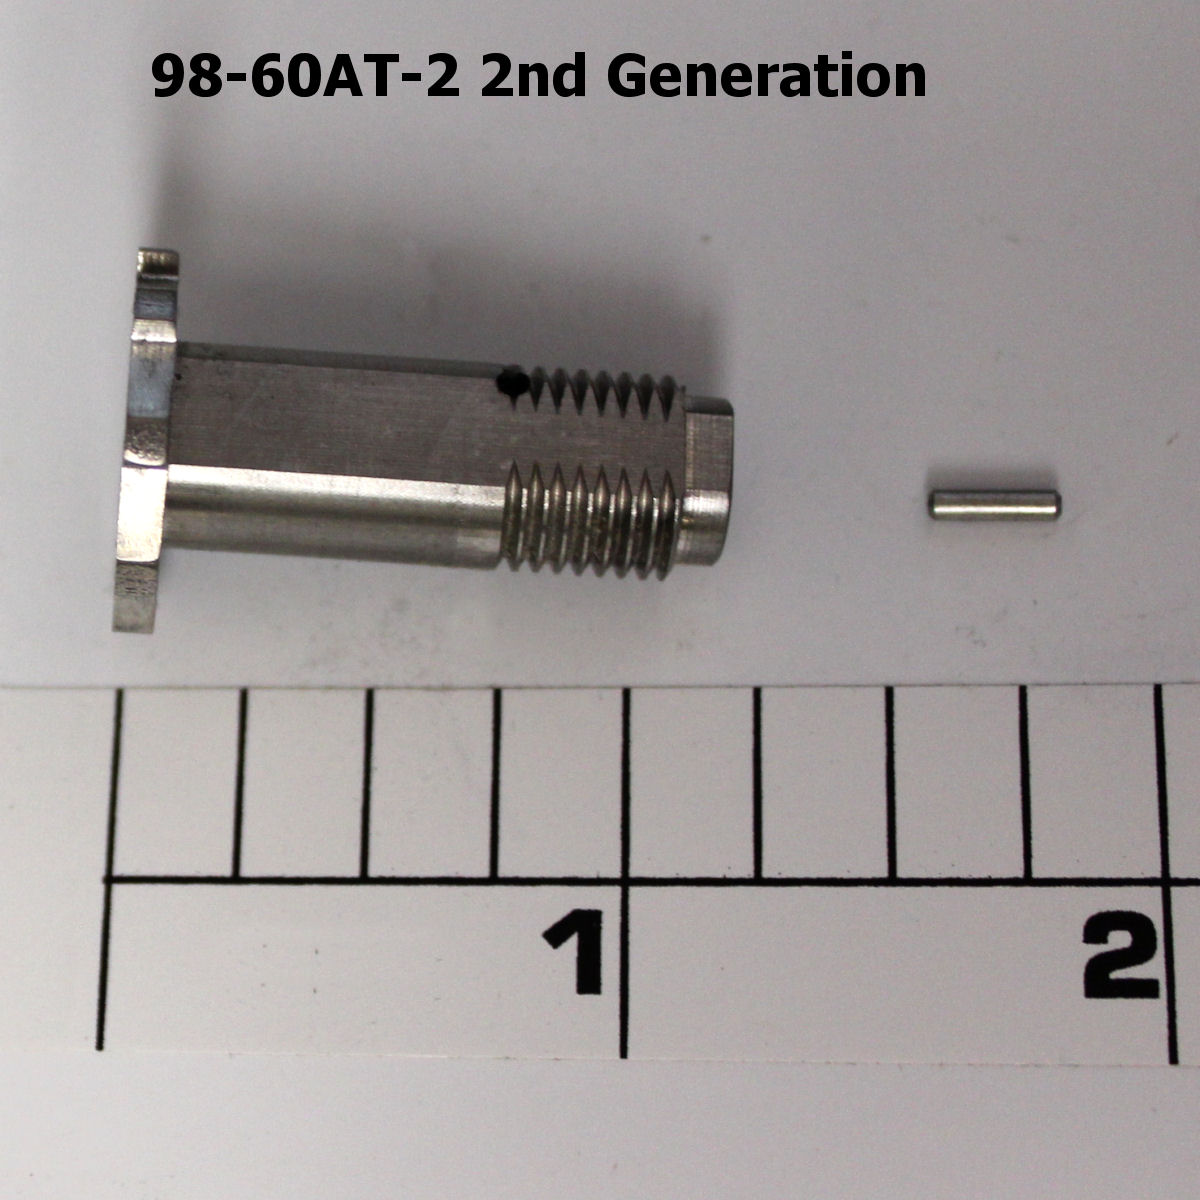 98-60AT-2 2nd Gen Sleeve, Gear Sleeve (comes with pin) COARSE Tooth (Stainless) (Optional)